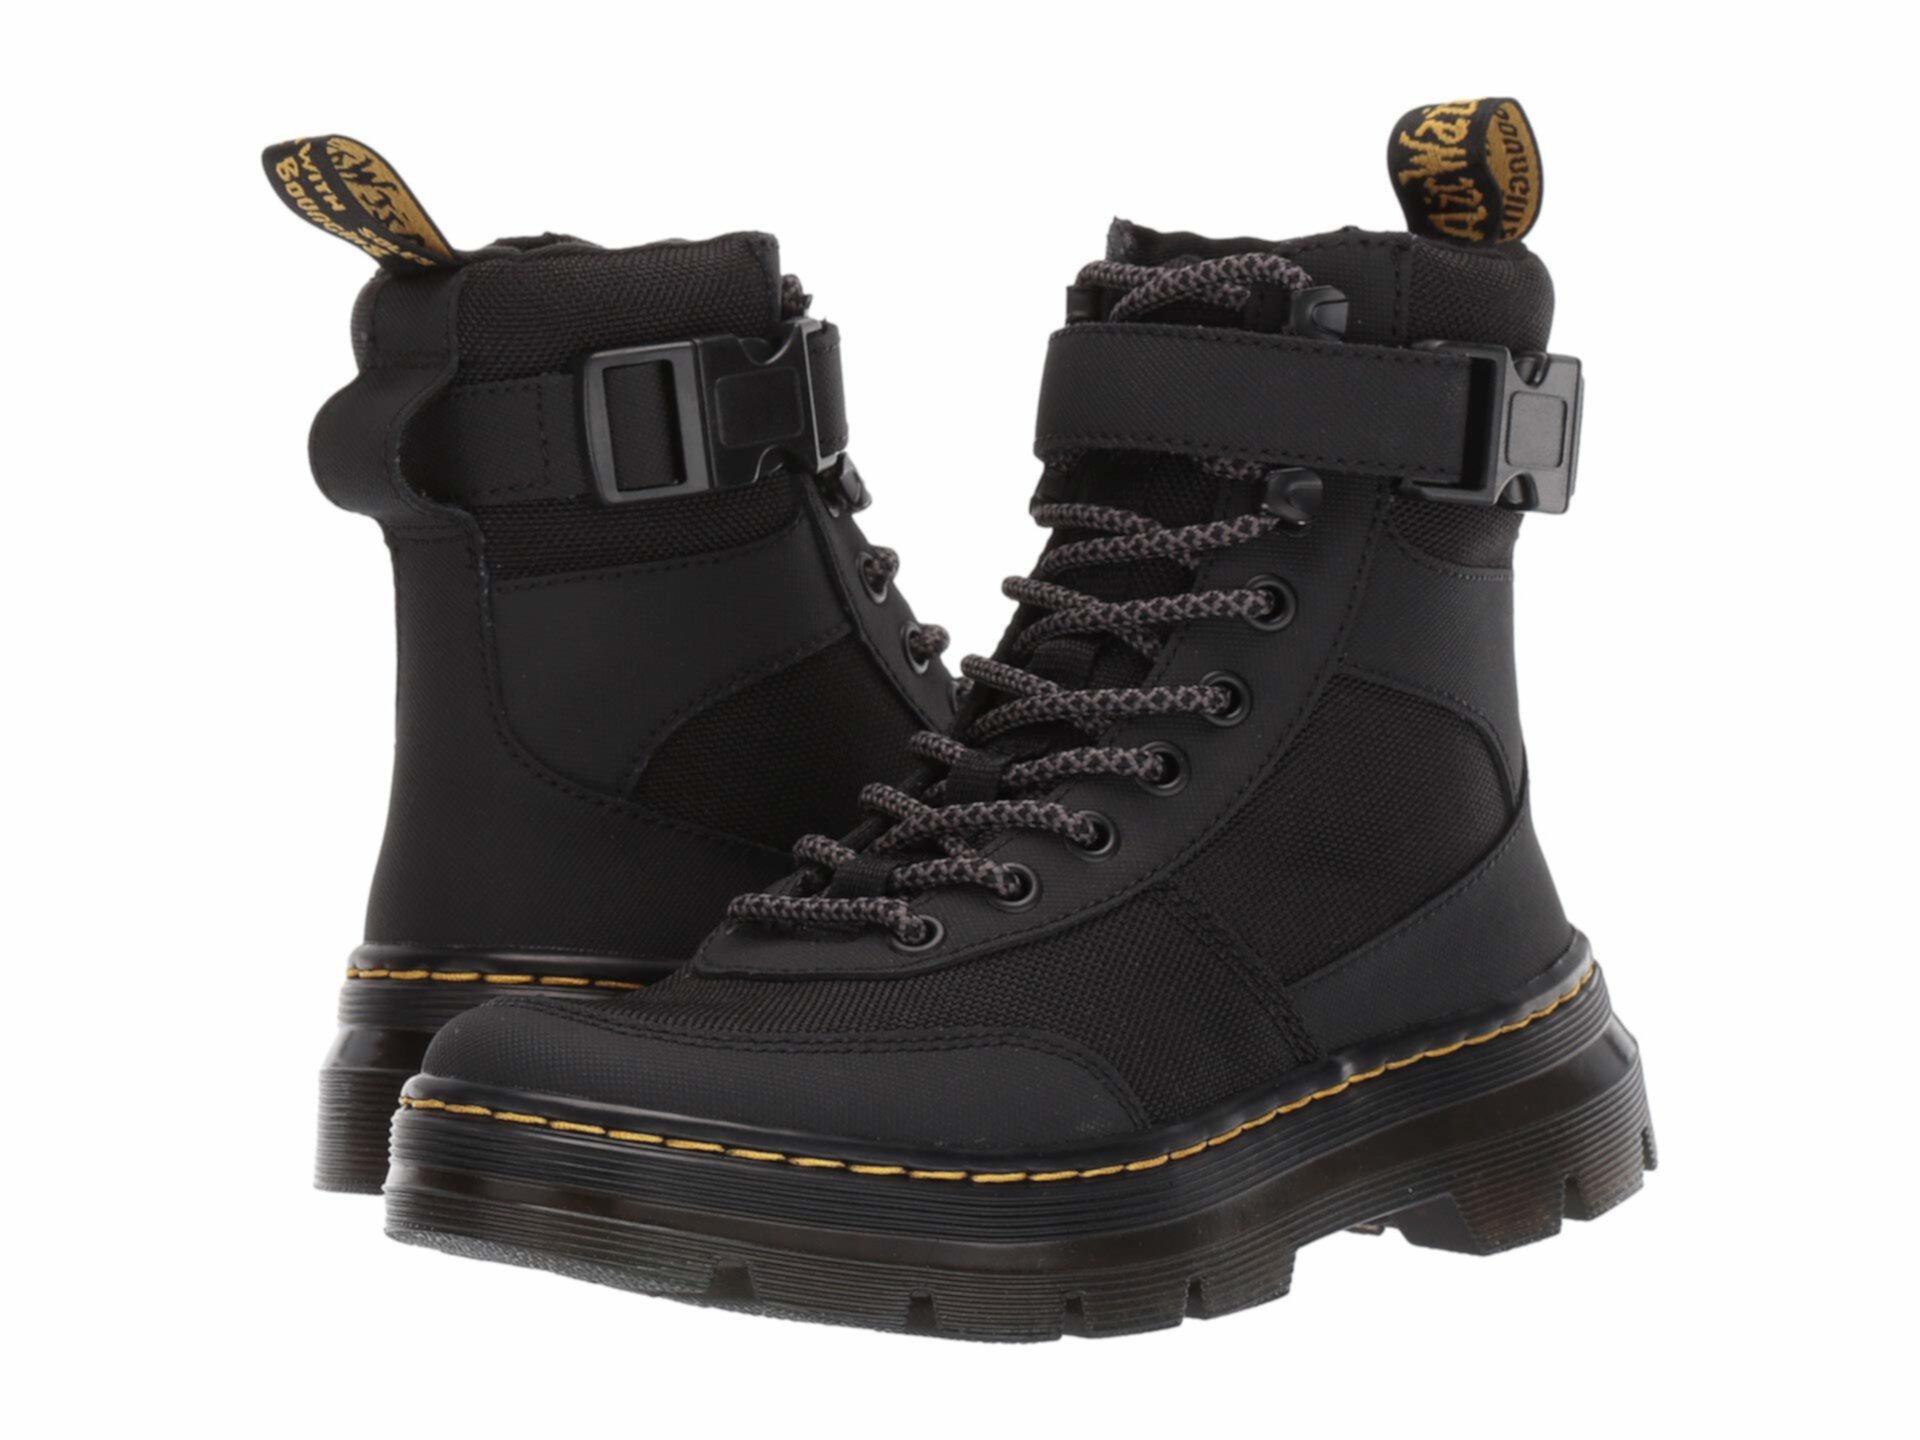 Combs Tech Tract Dr. Martens